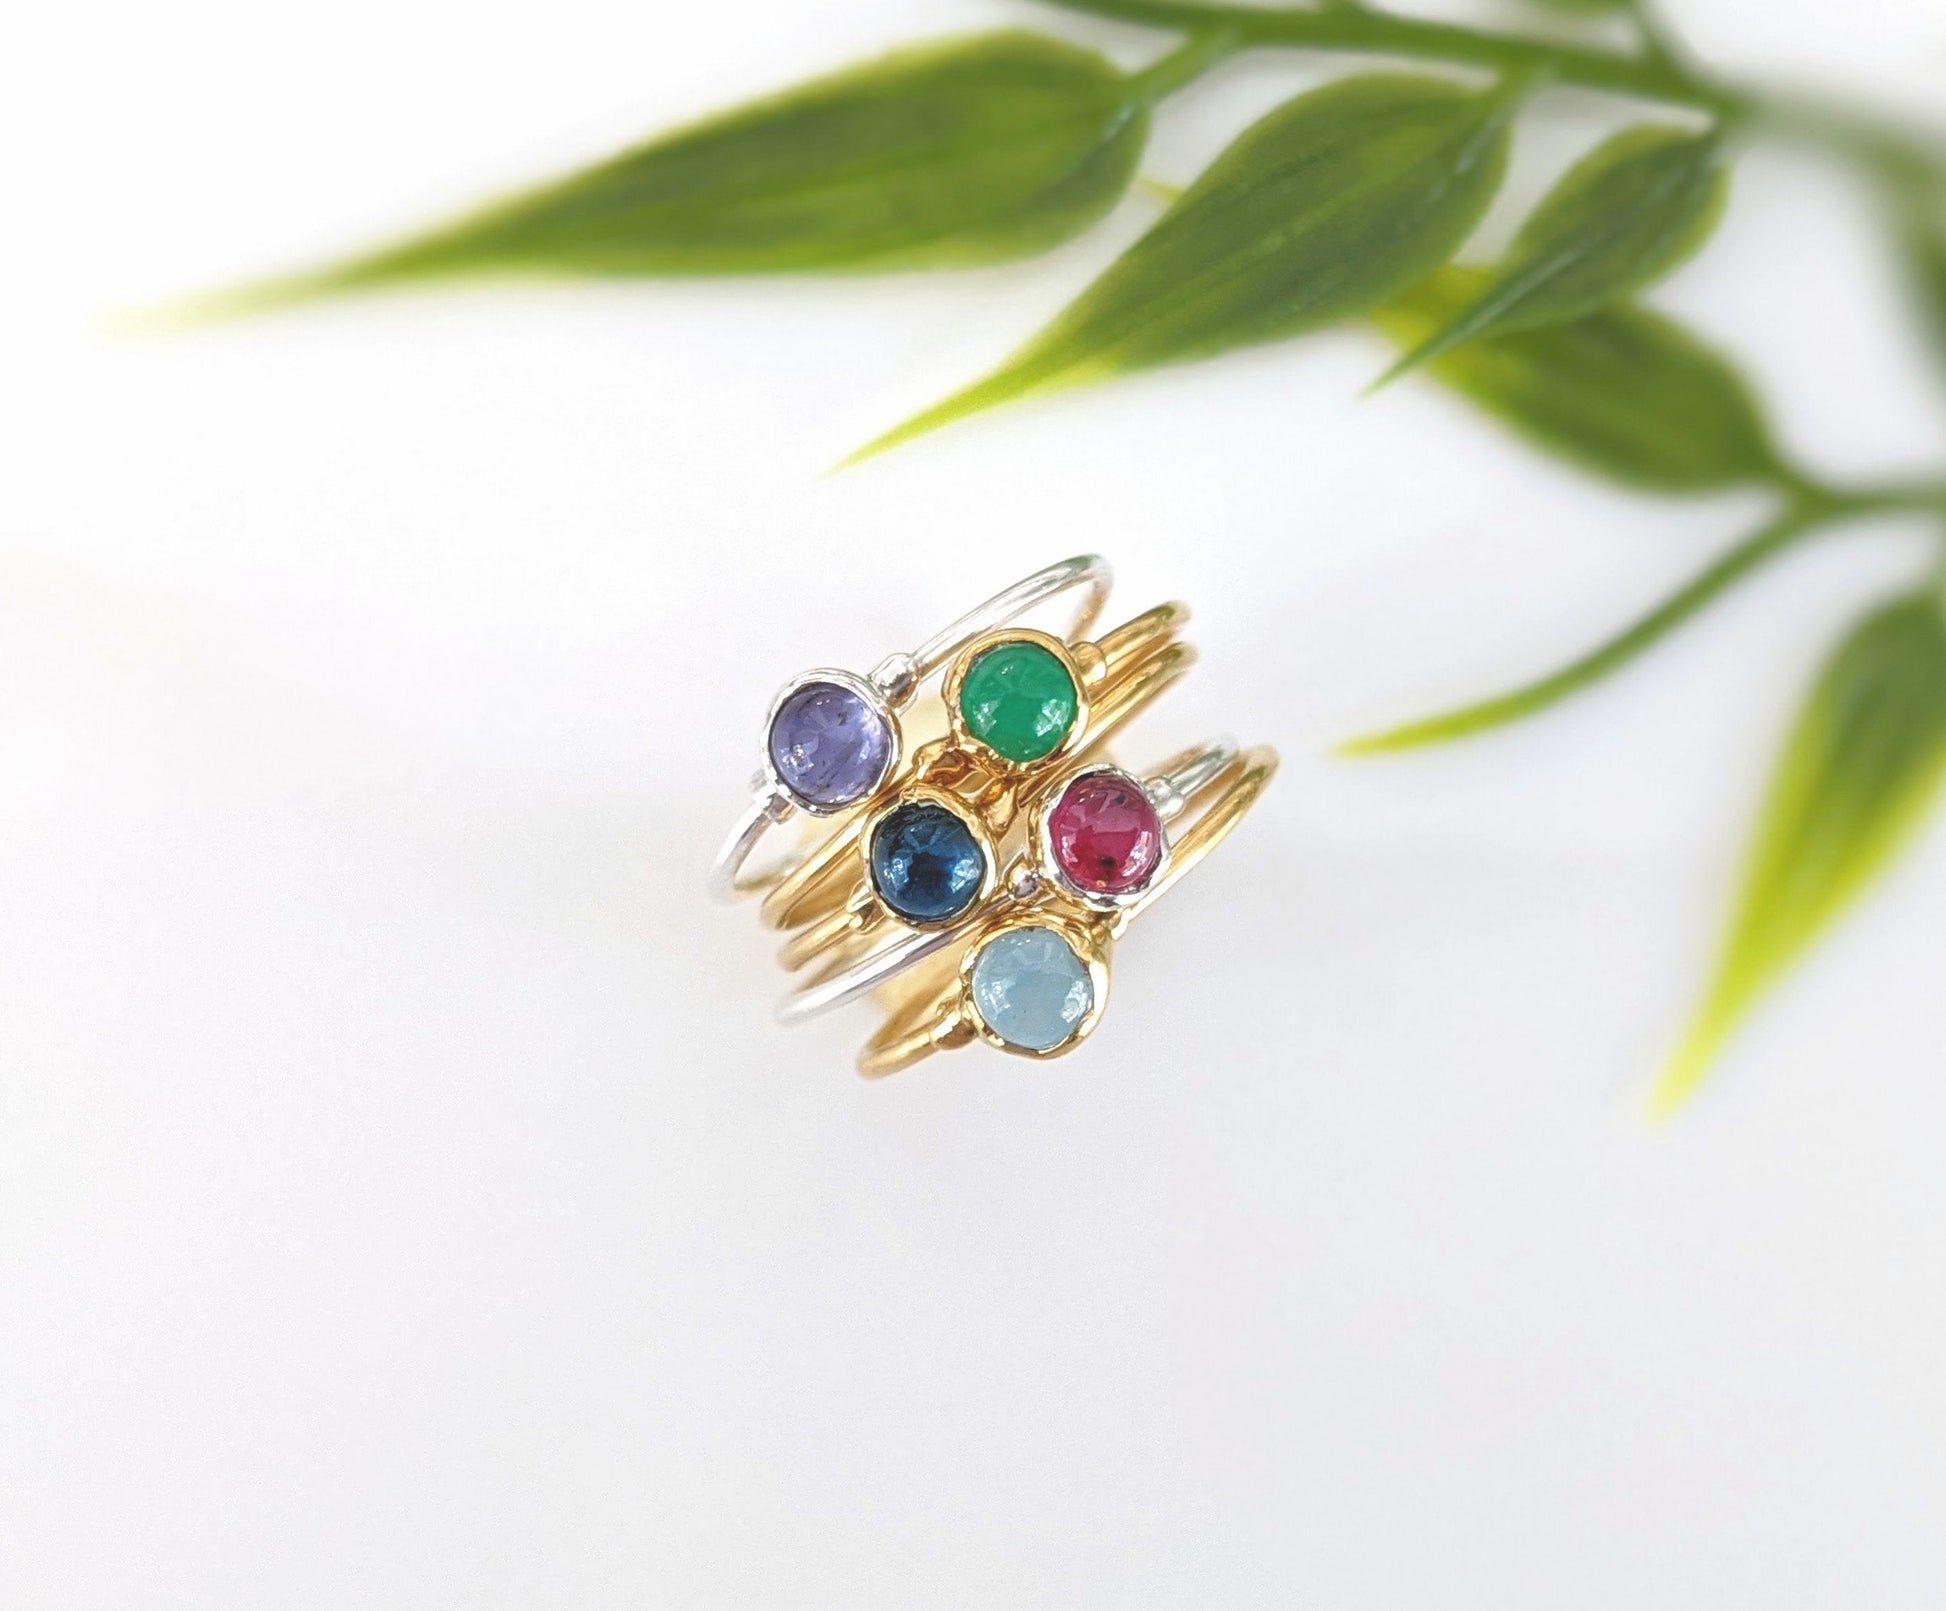 Aquamarine ring, Gold stacking ring, Birthstone ring, Dainty ring, Promise ring, Minimalist ring, Boho ring, Engagement ring, Gift for her